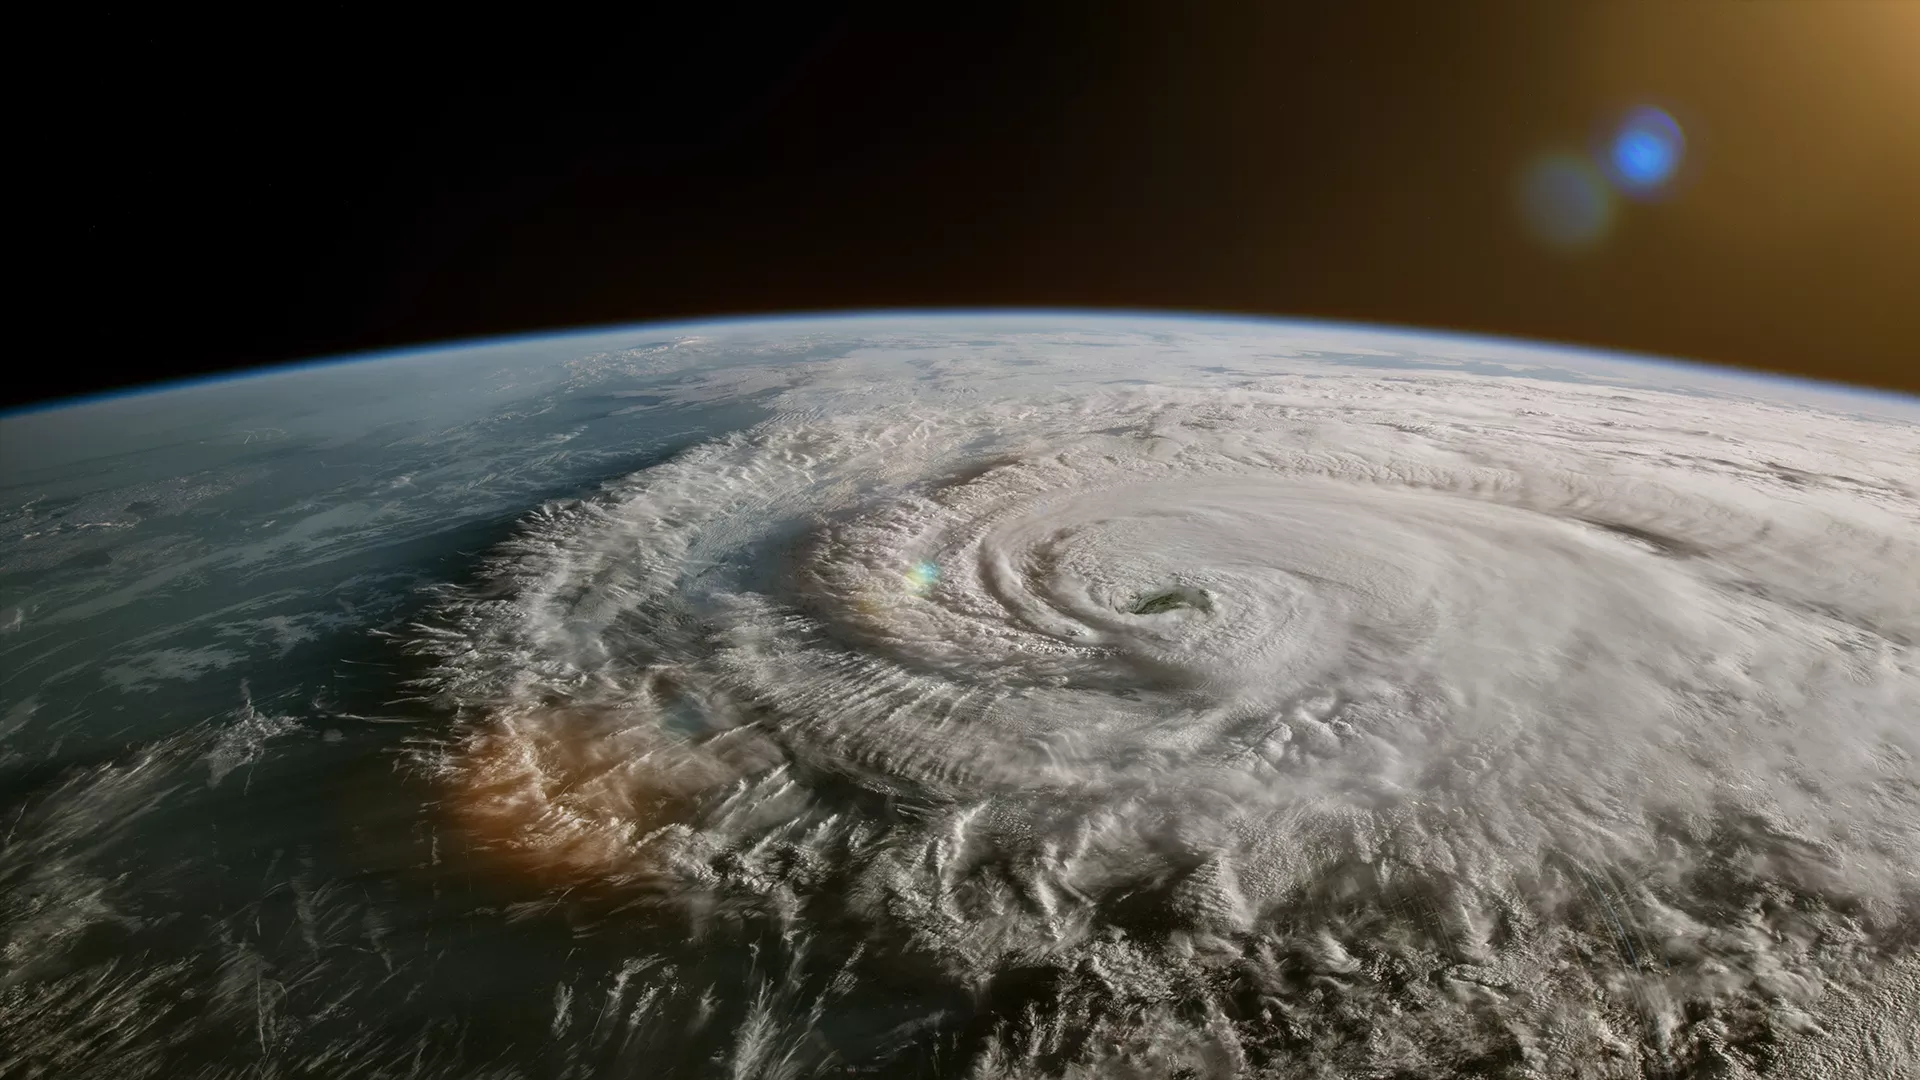 image of a cyclone from above the earth